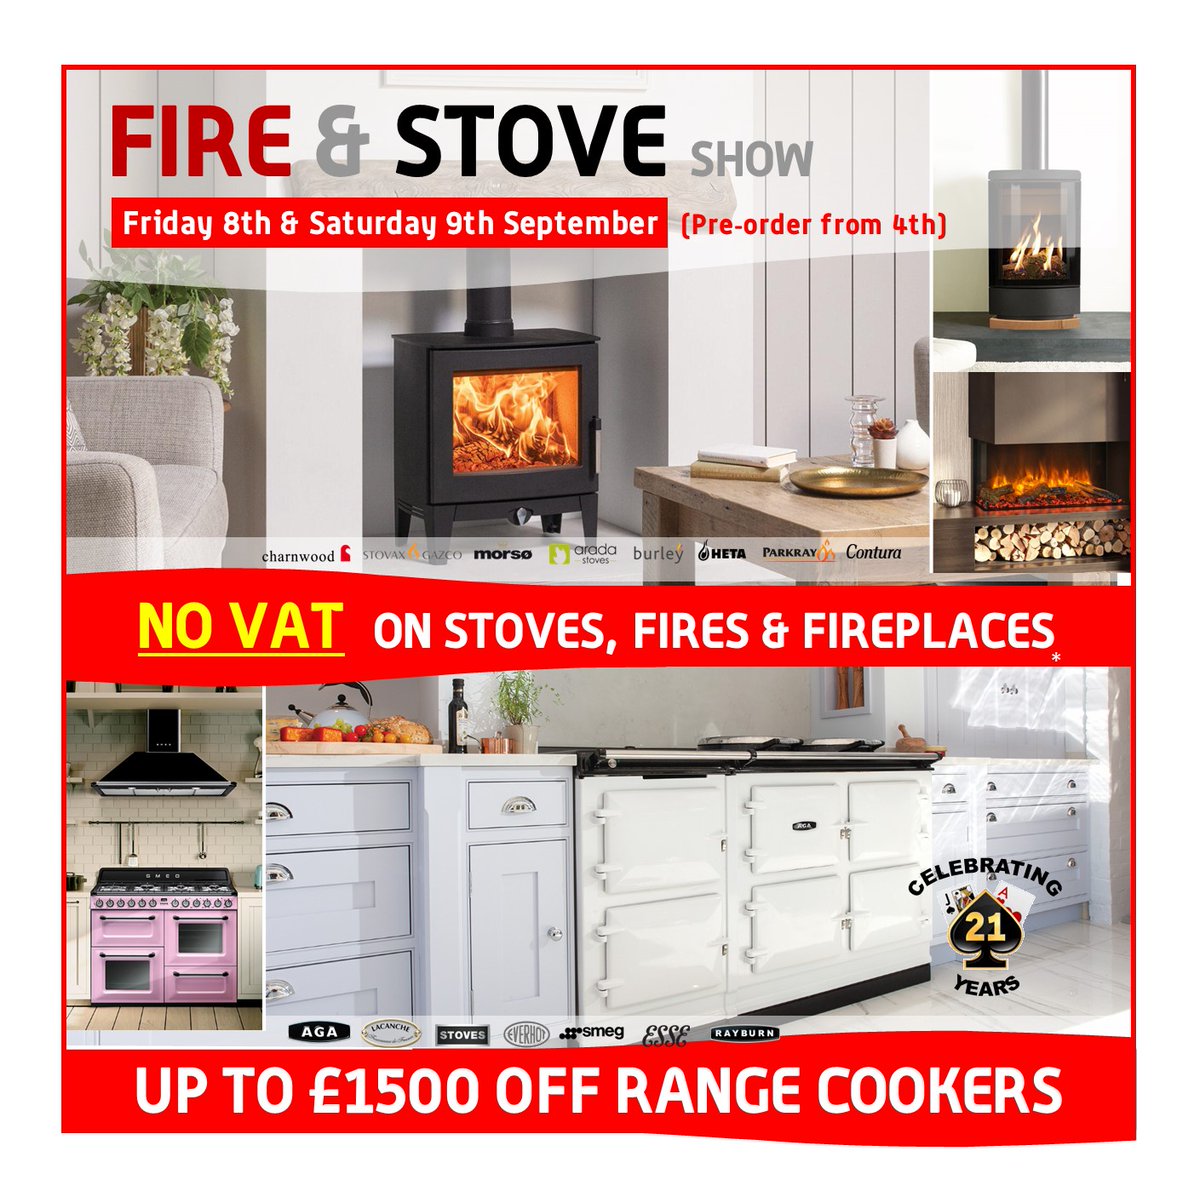 We are celebrating 21 years of our ever popular Fire & Stove Show this year! *EXCLUSIVE OFFERS ON AGA & RAYBURN COOKERS* For more information & to see all the amazing offers please visit our website : fireandstoveshow.co.uk